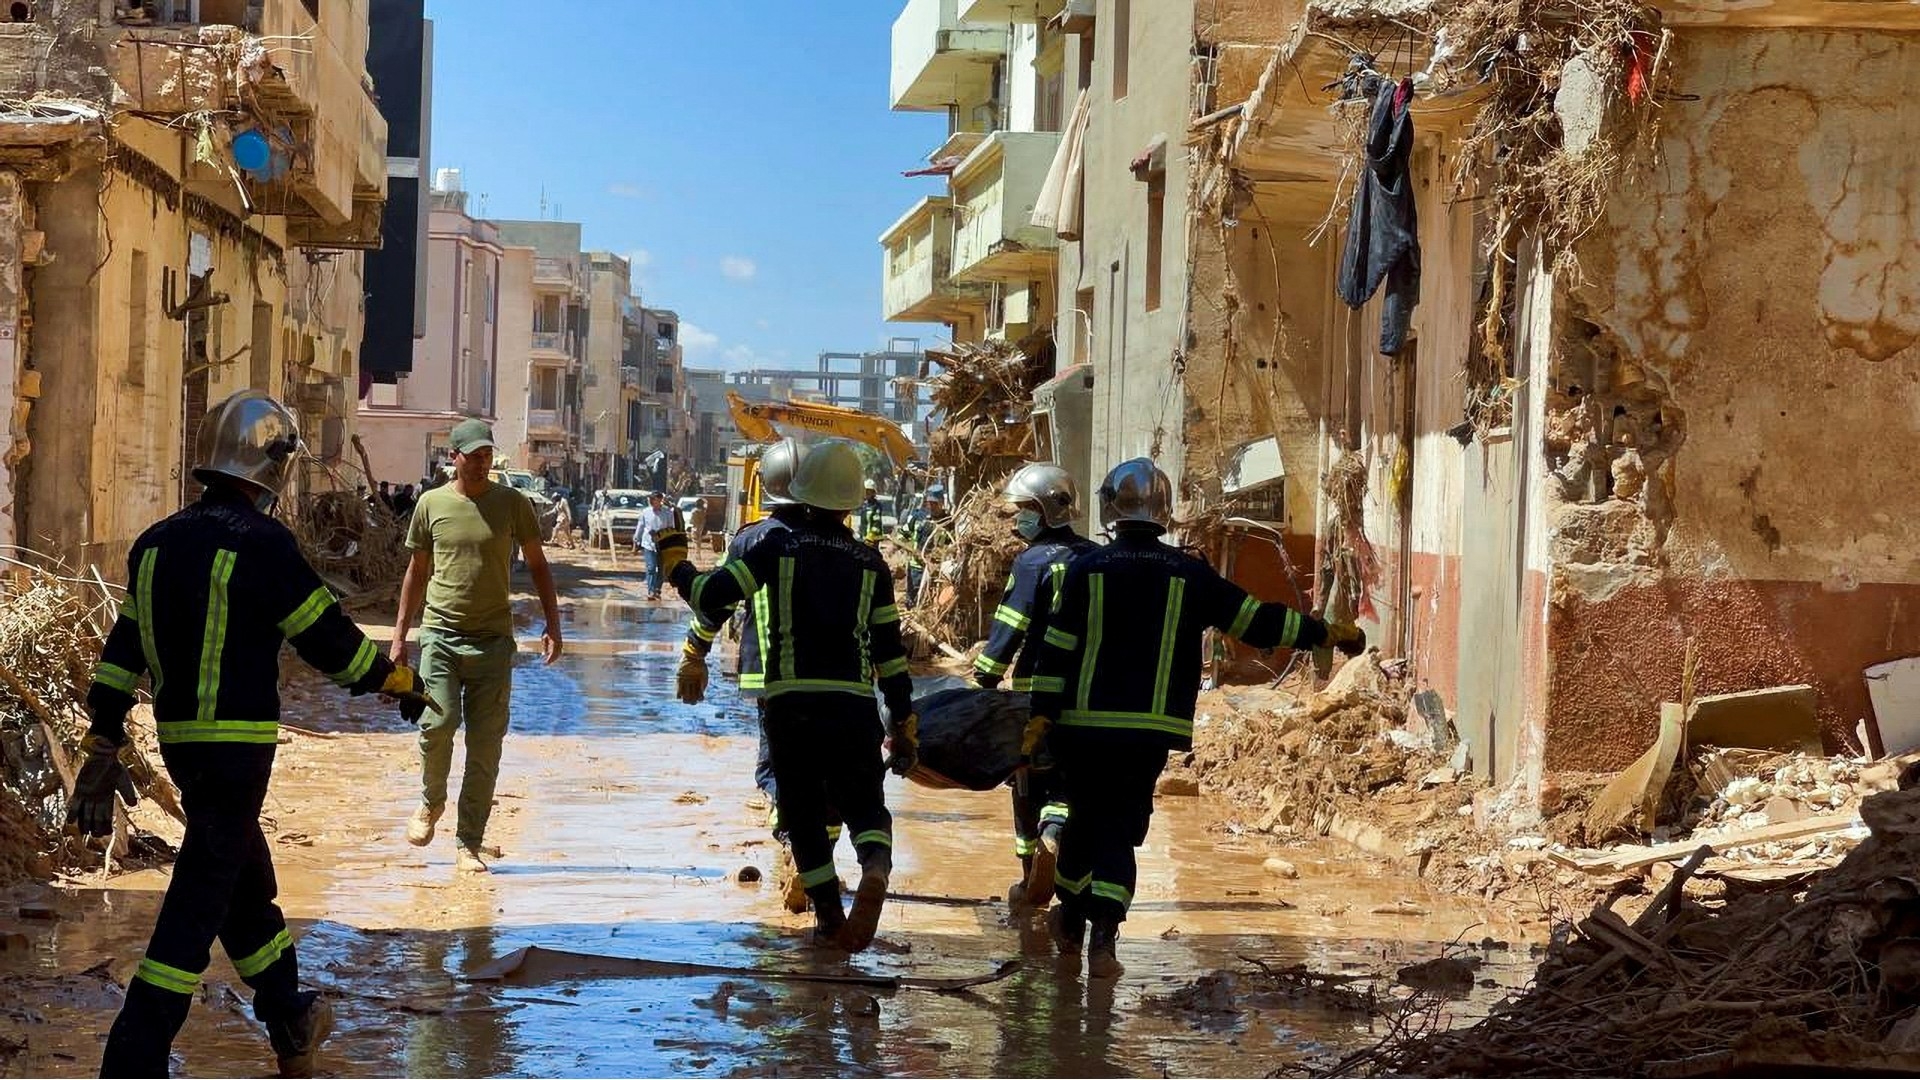 Members of the rescue teams from the Egyptian army carry a dead body as they walk in the mud between the destroyed buildings of Derna, 13 September (Reuters)